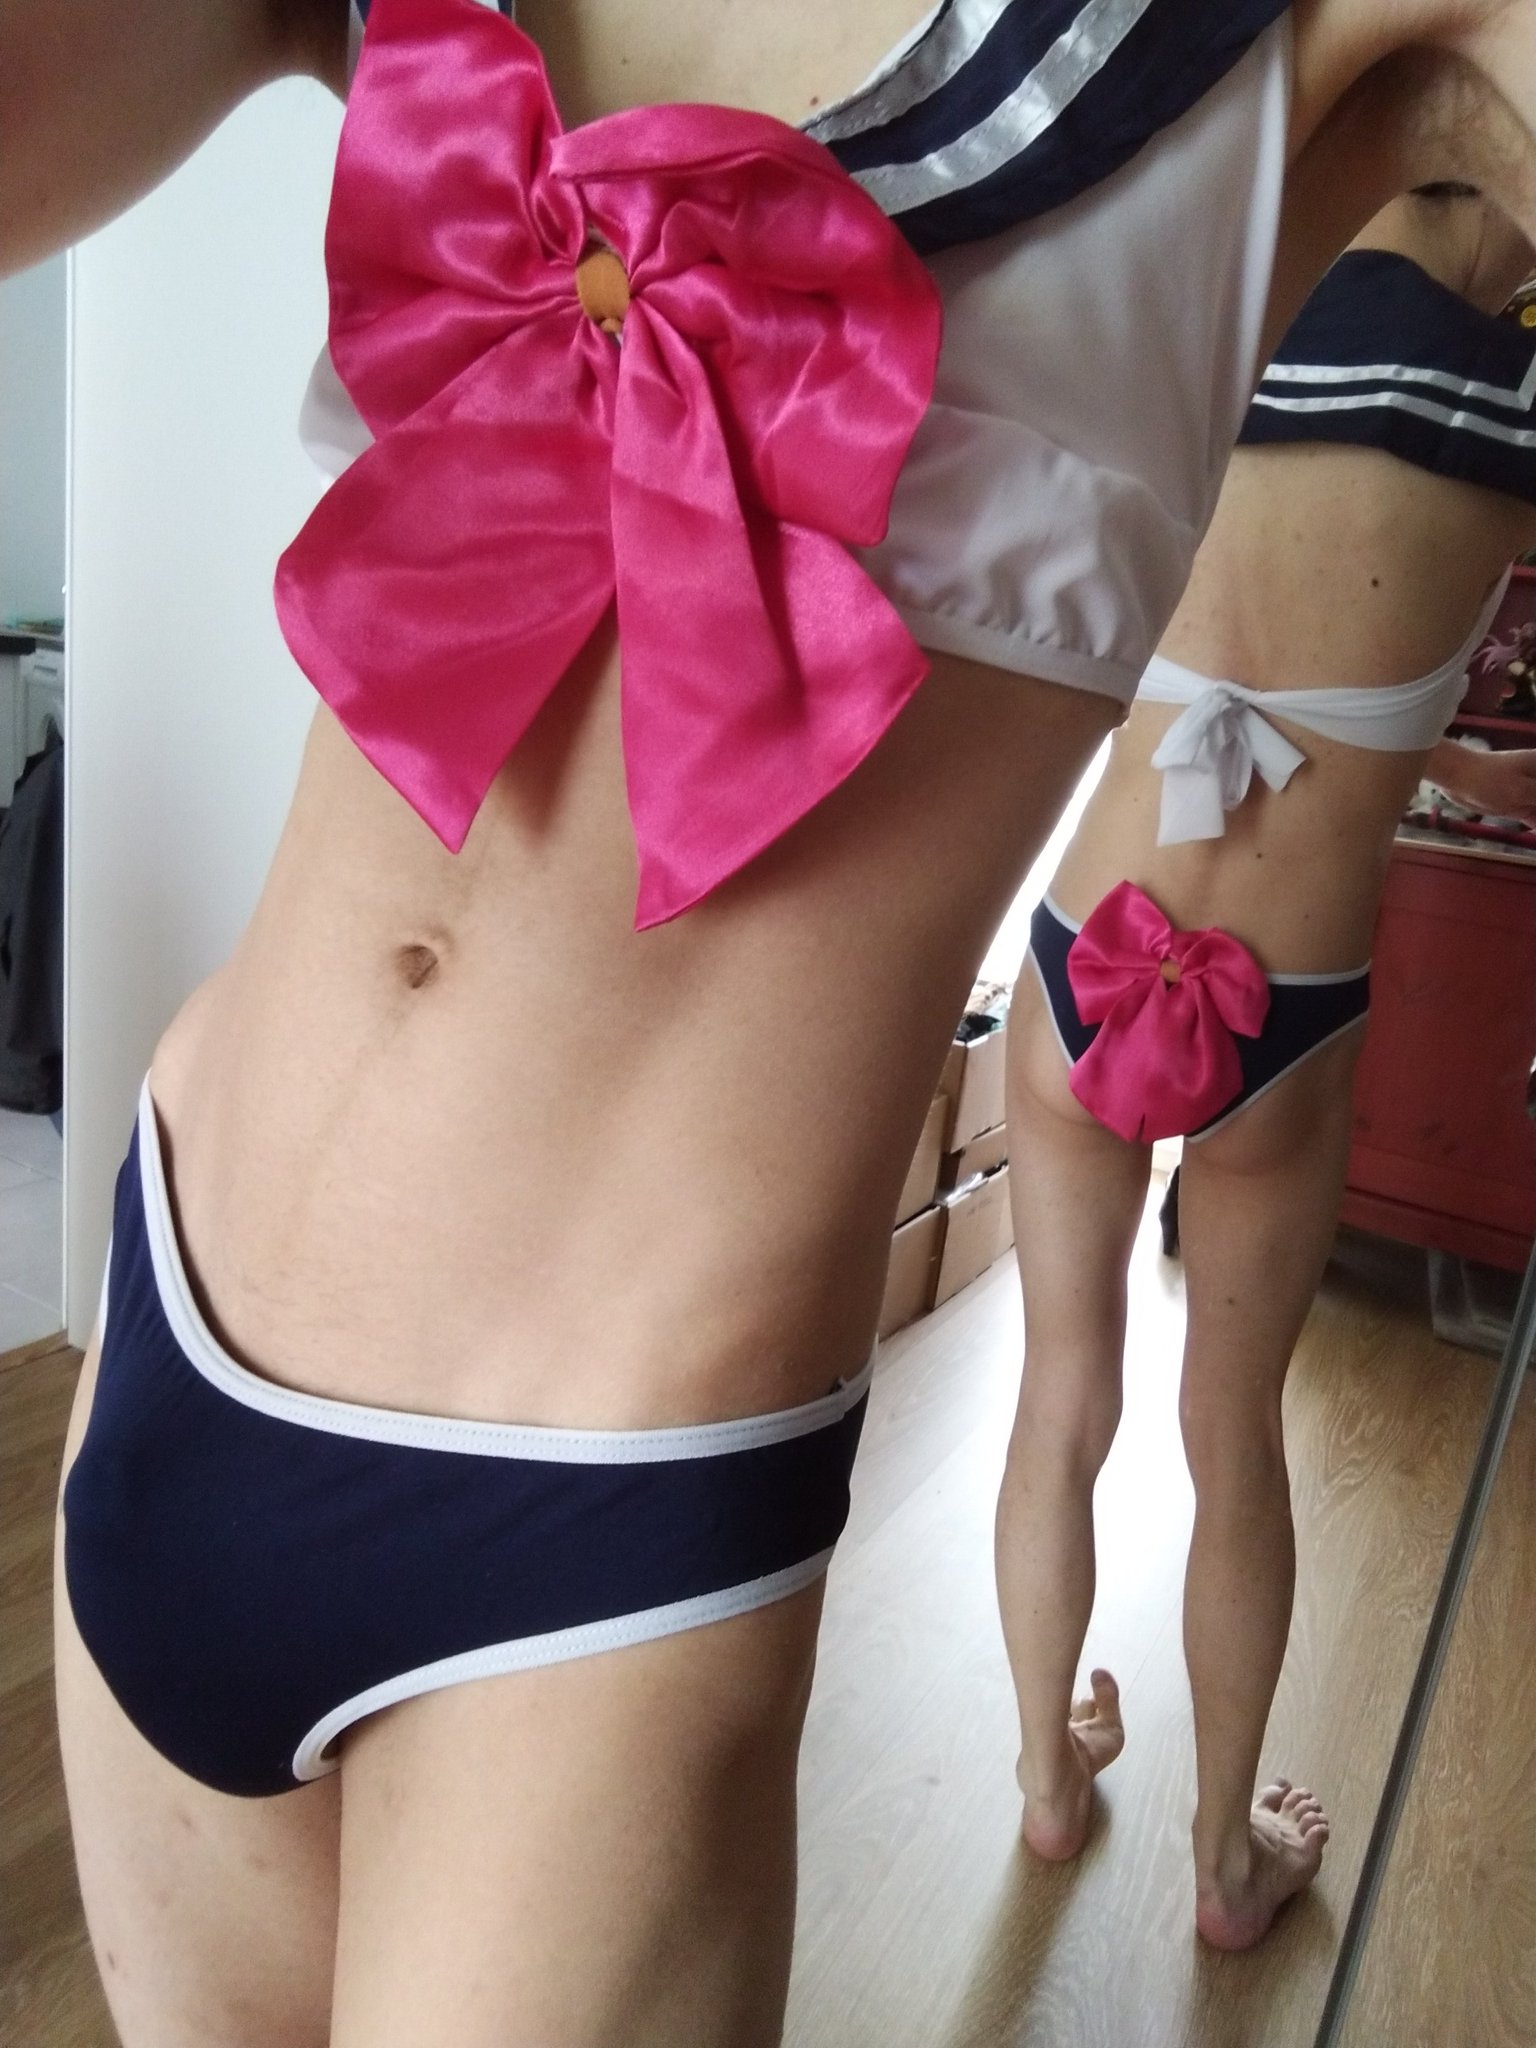 “What you prefer, the bulge and pp out of #panties? °w° #nsfw #femboy #trap...